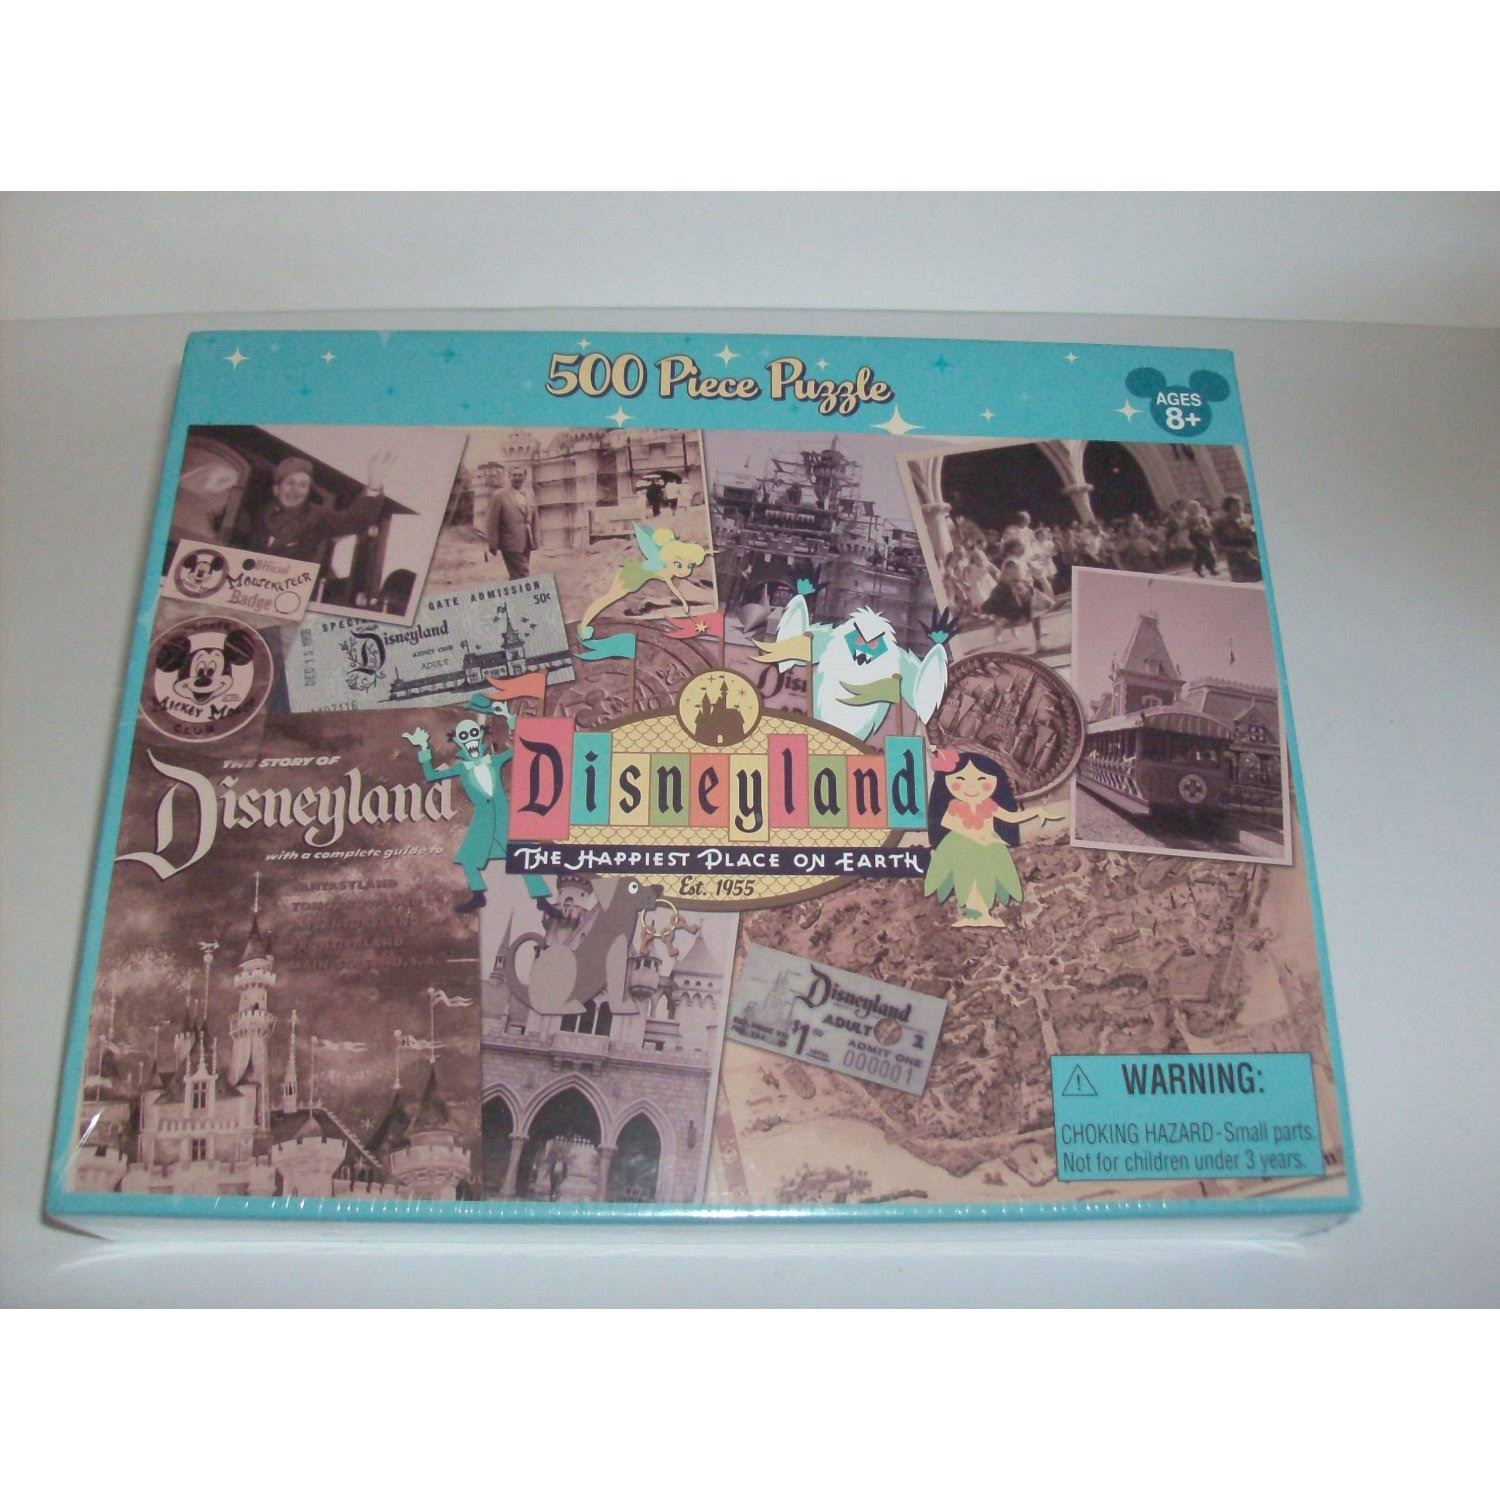 Disneyland 50th Aniversary Special Edition 500 Piece Puzzle of Vintage 1955 Theme Park